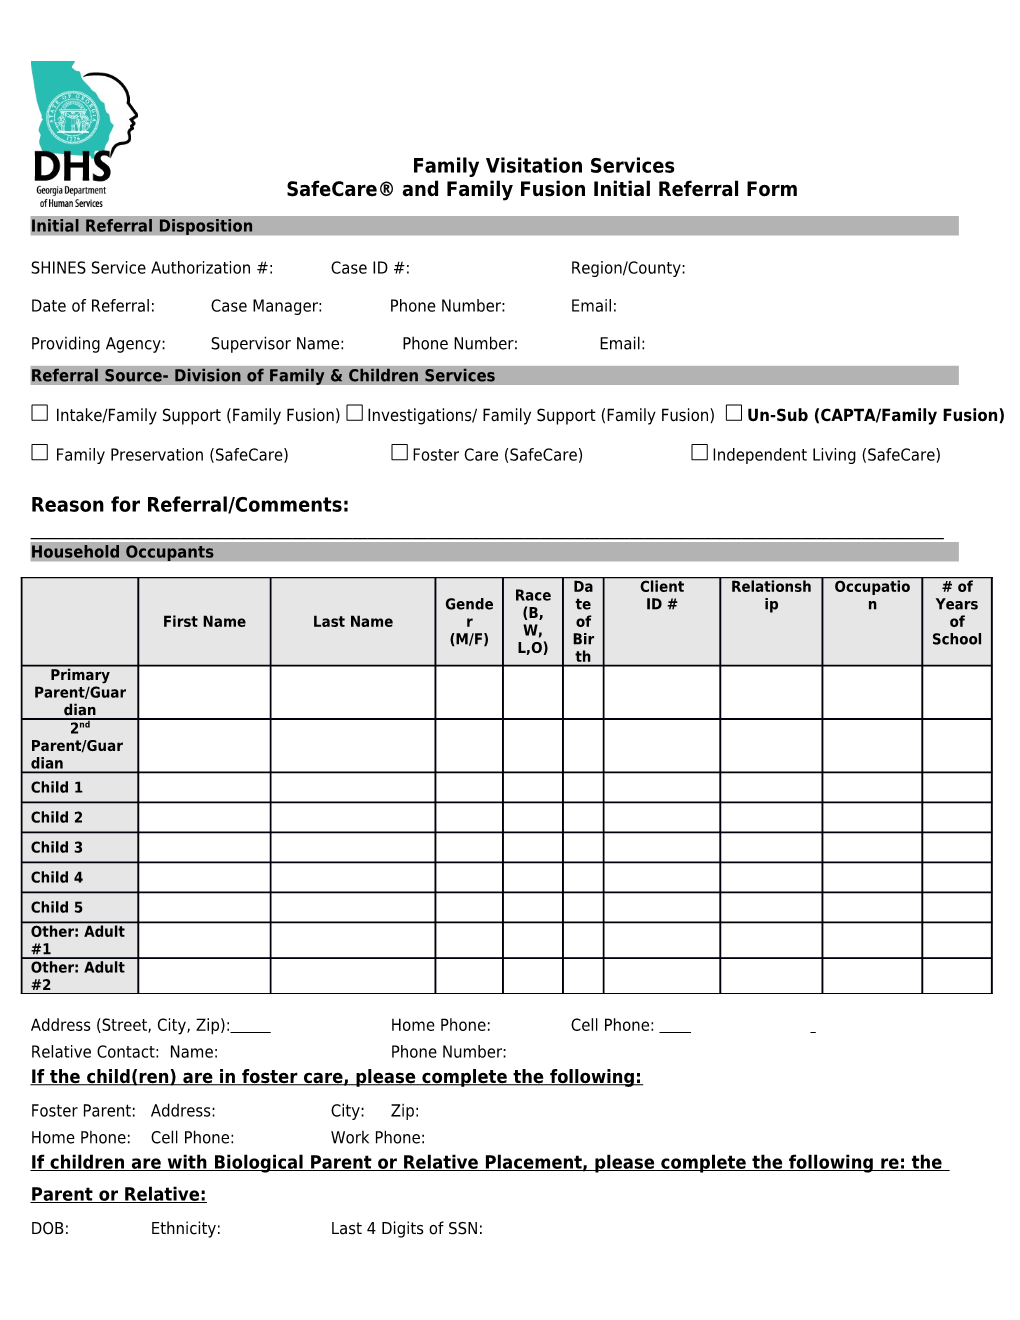 Safecare and Family Fusion Initial Referral Form